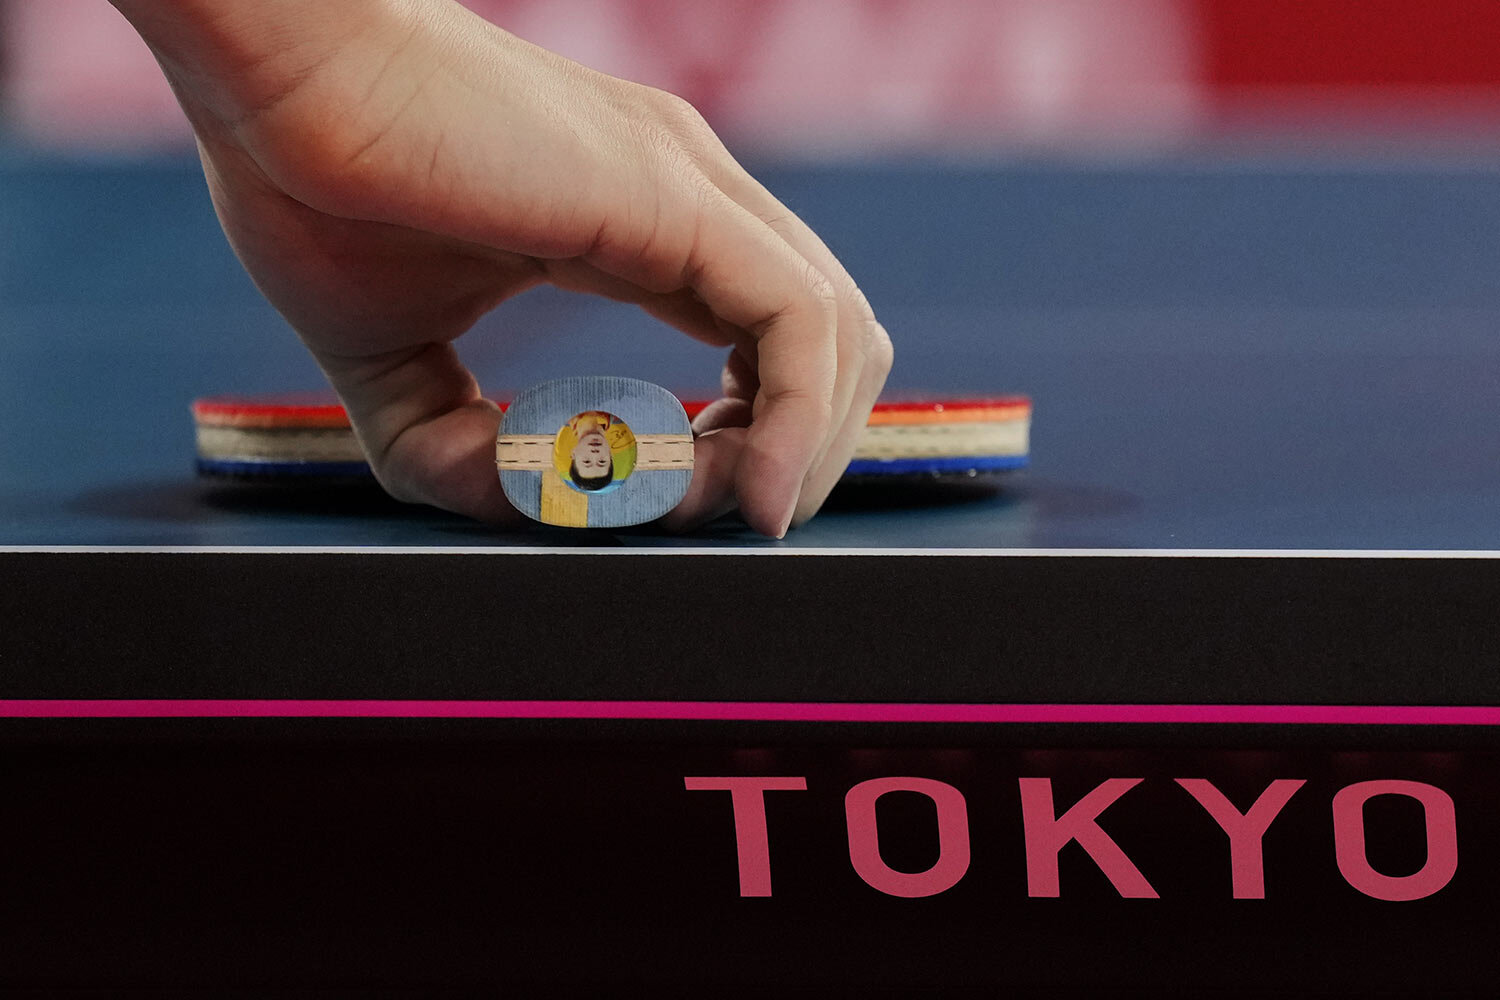  Ma Long of China picks up his racket during a gold medal match of the table tennis men's singles against Fan Zhendong of China at the 2020 Summer Olympics, Friday, July 30, 2021, in Tokyo. (AP Photo/Kin Cheung) 